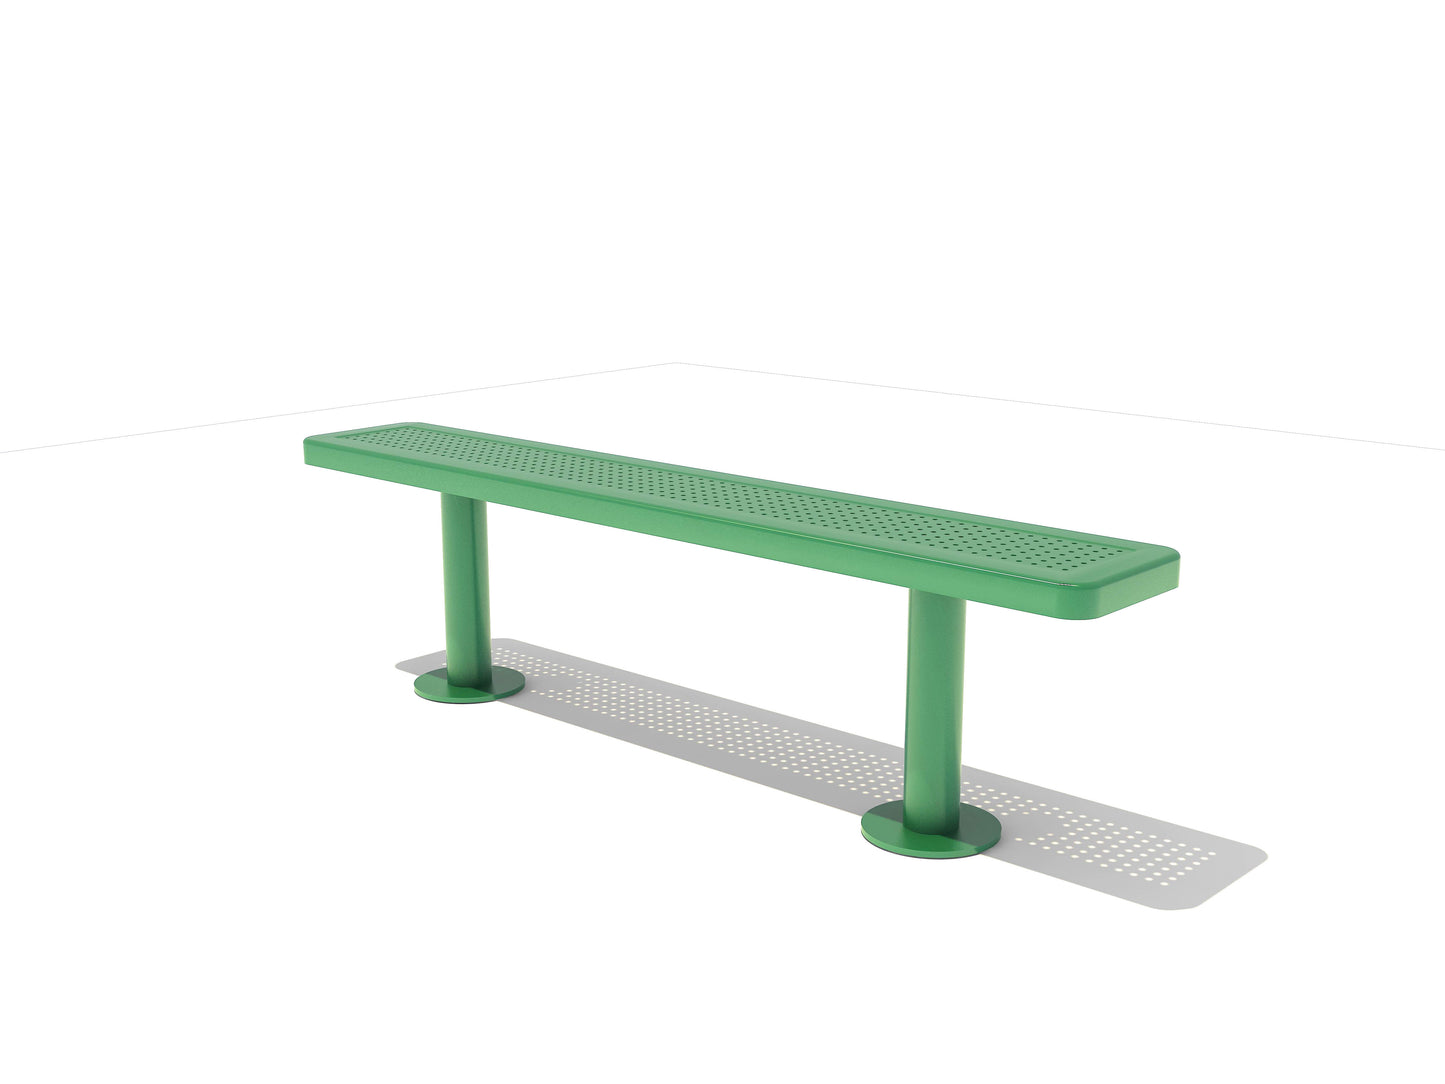 6' Bench without Back - Perforated Default Title